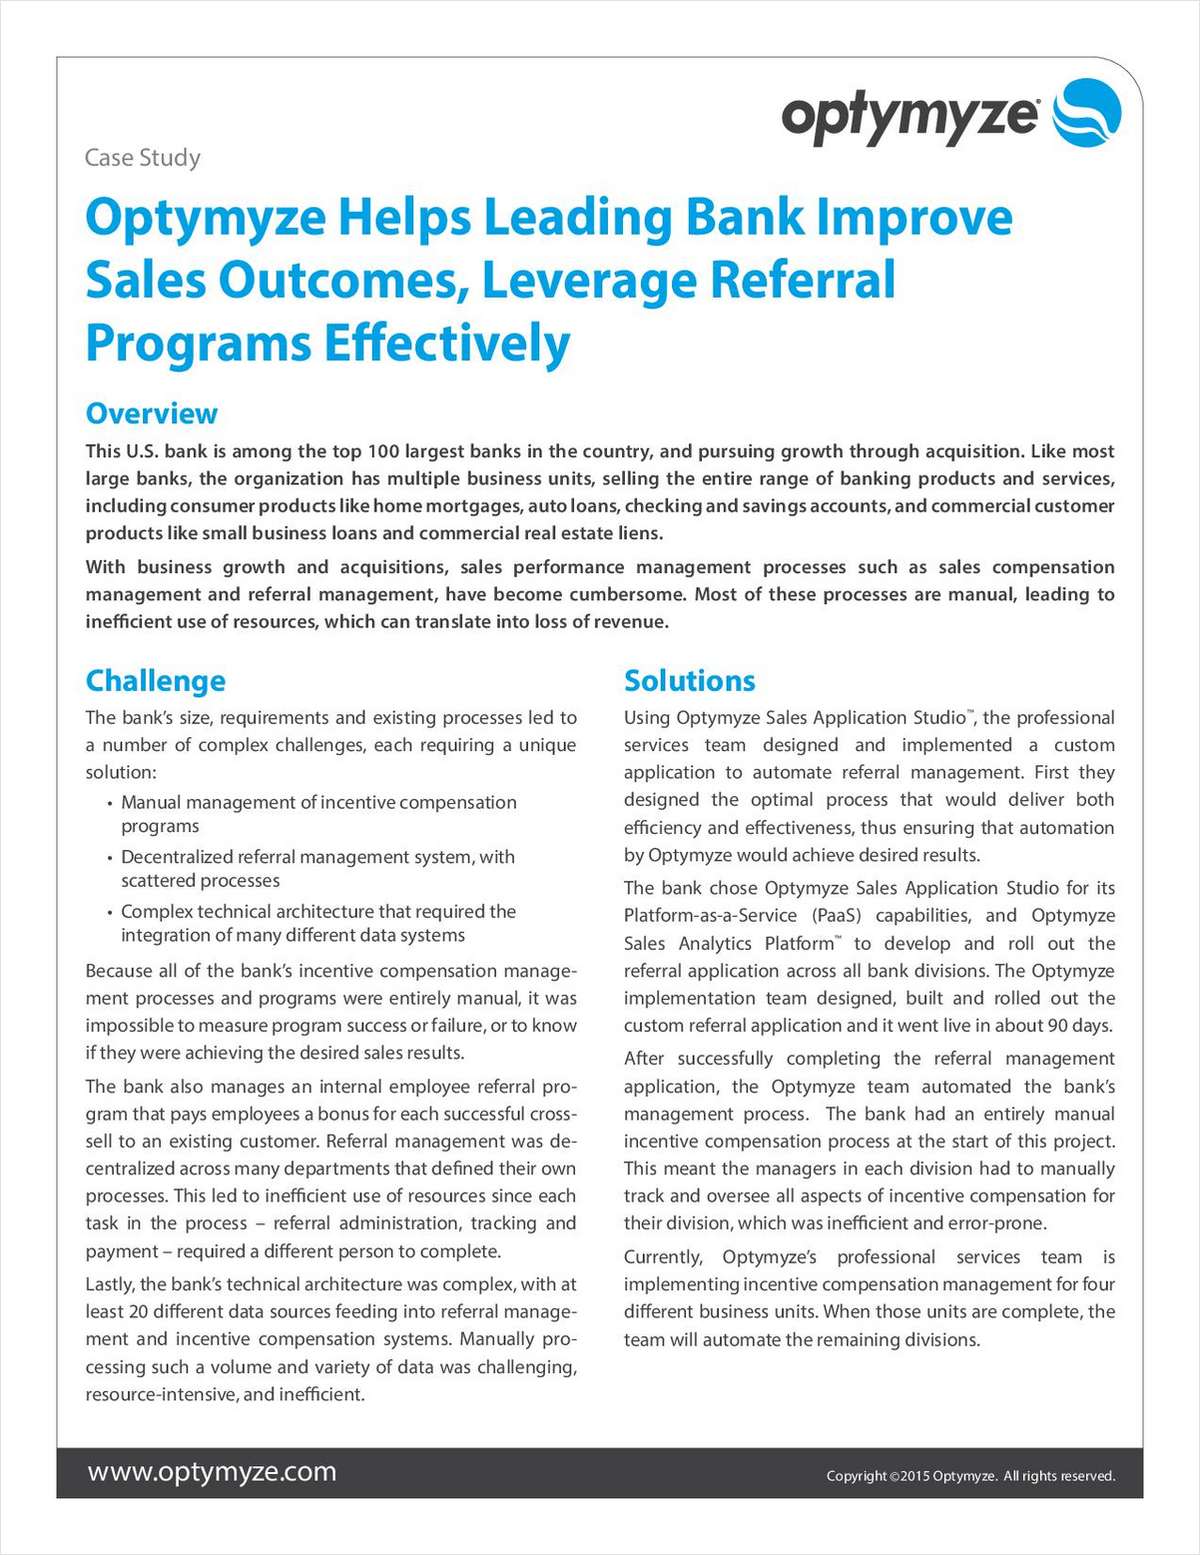 Optymyze Helps Leading Bank Improve Sales Outcomes, Leverage Referral Programs Effectively